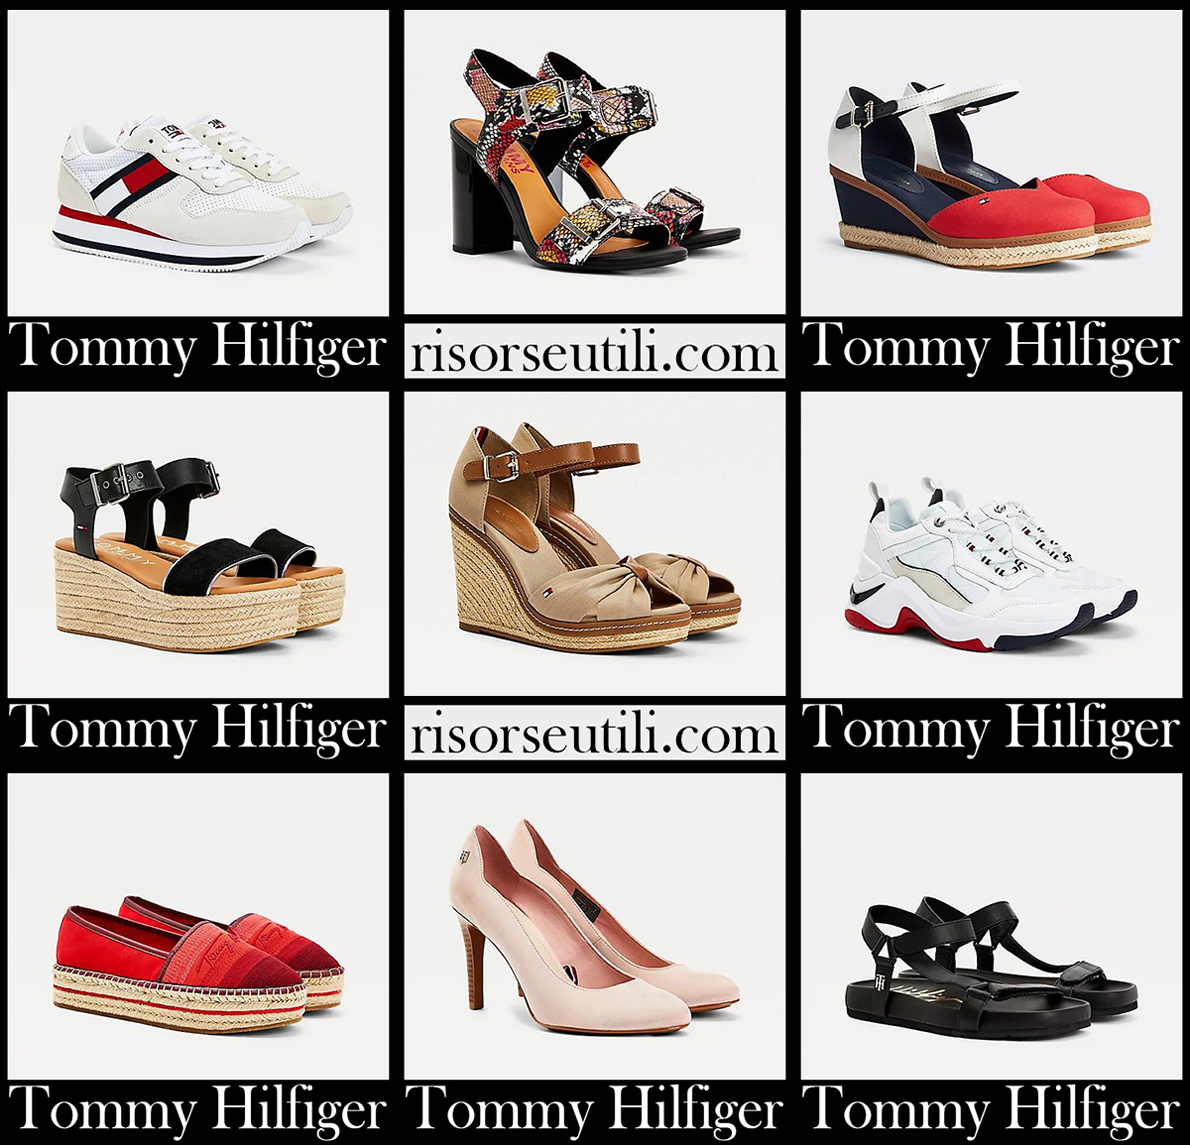 New arrivals Tommy Hilfiger shoes 2021 womens footwear